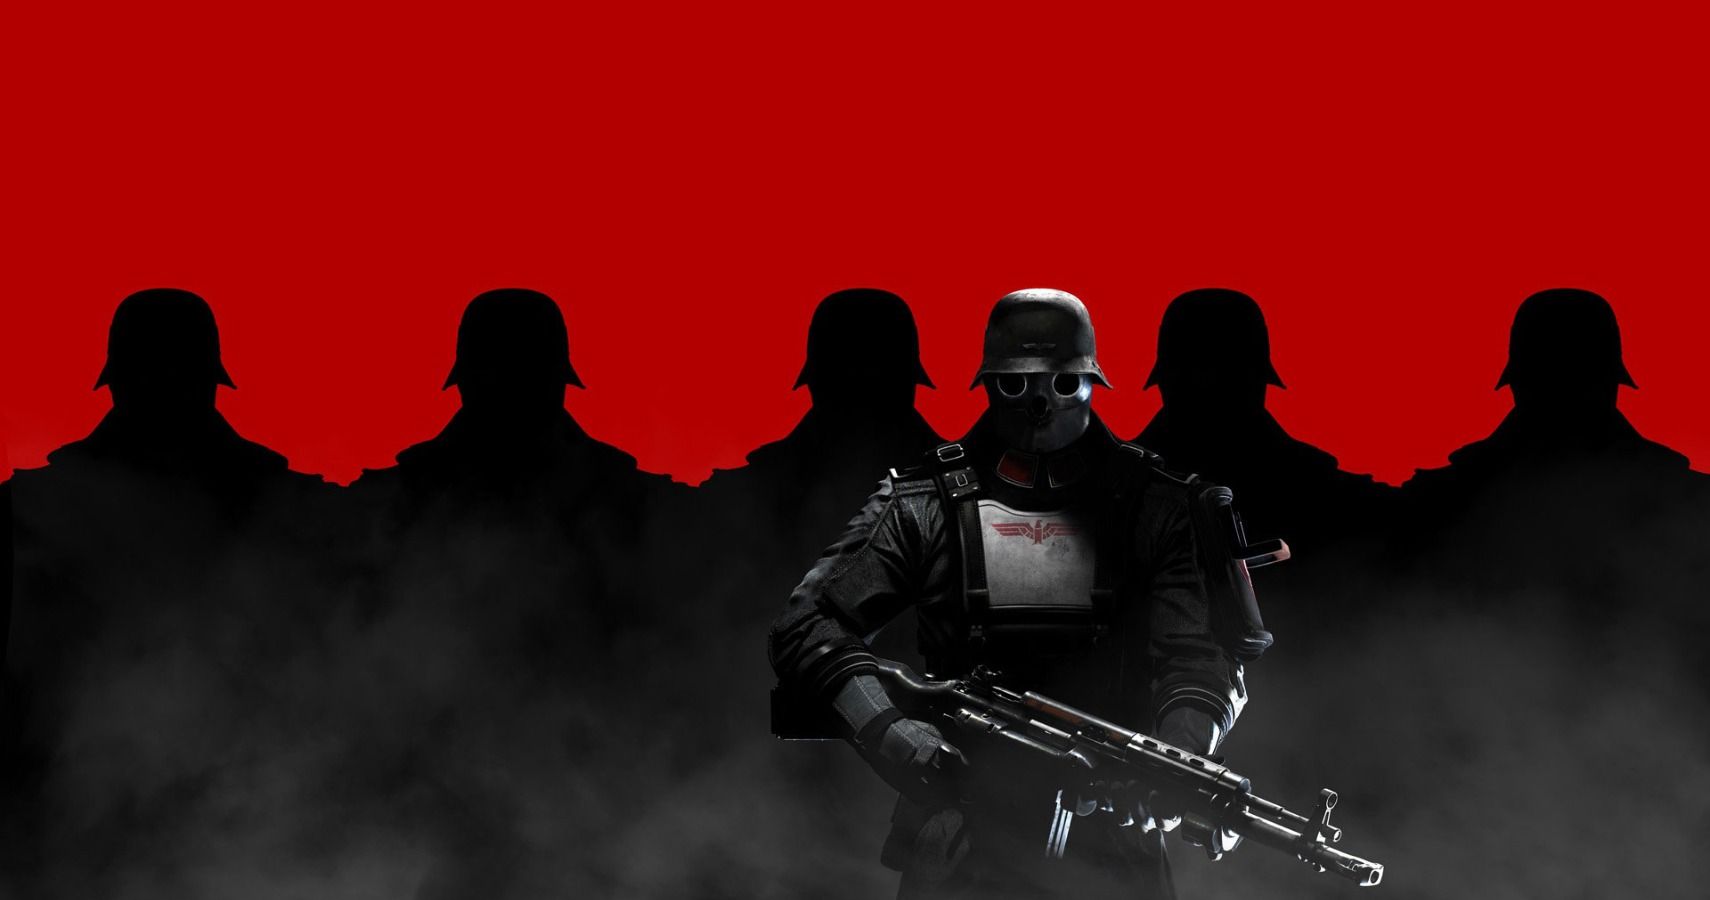 7 Years Later Remembering The Narrative Brilliance of Wolfenstein The New Order